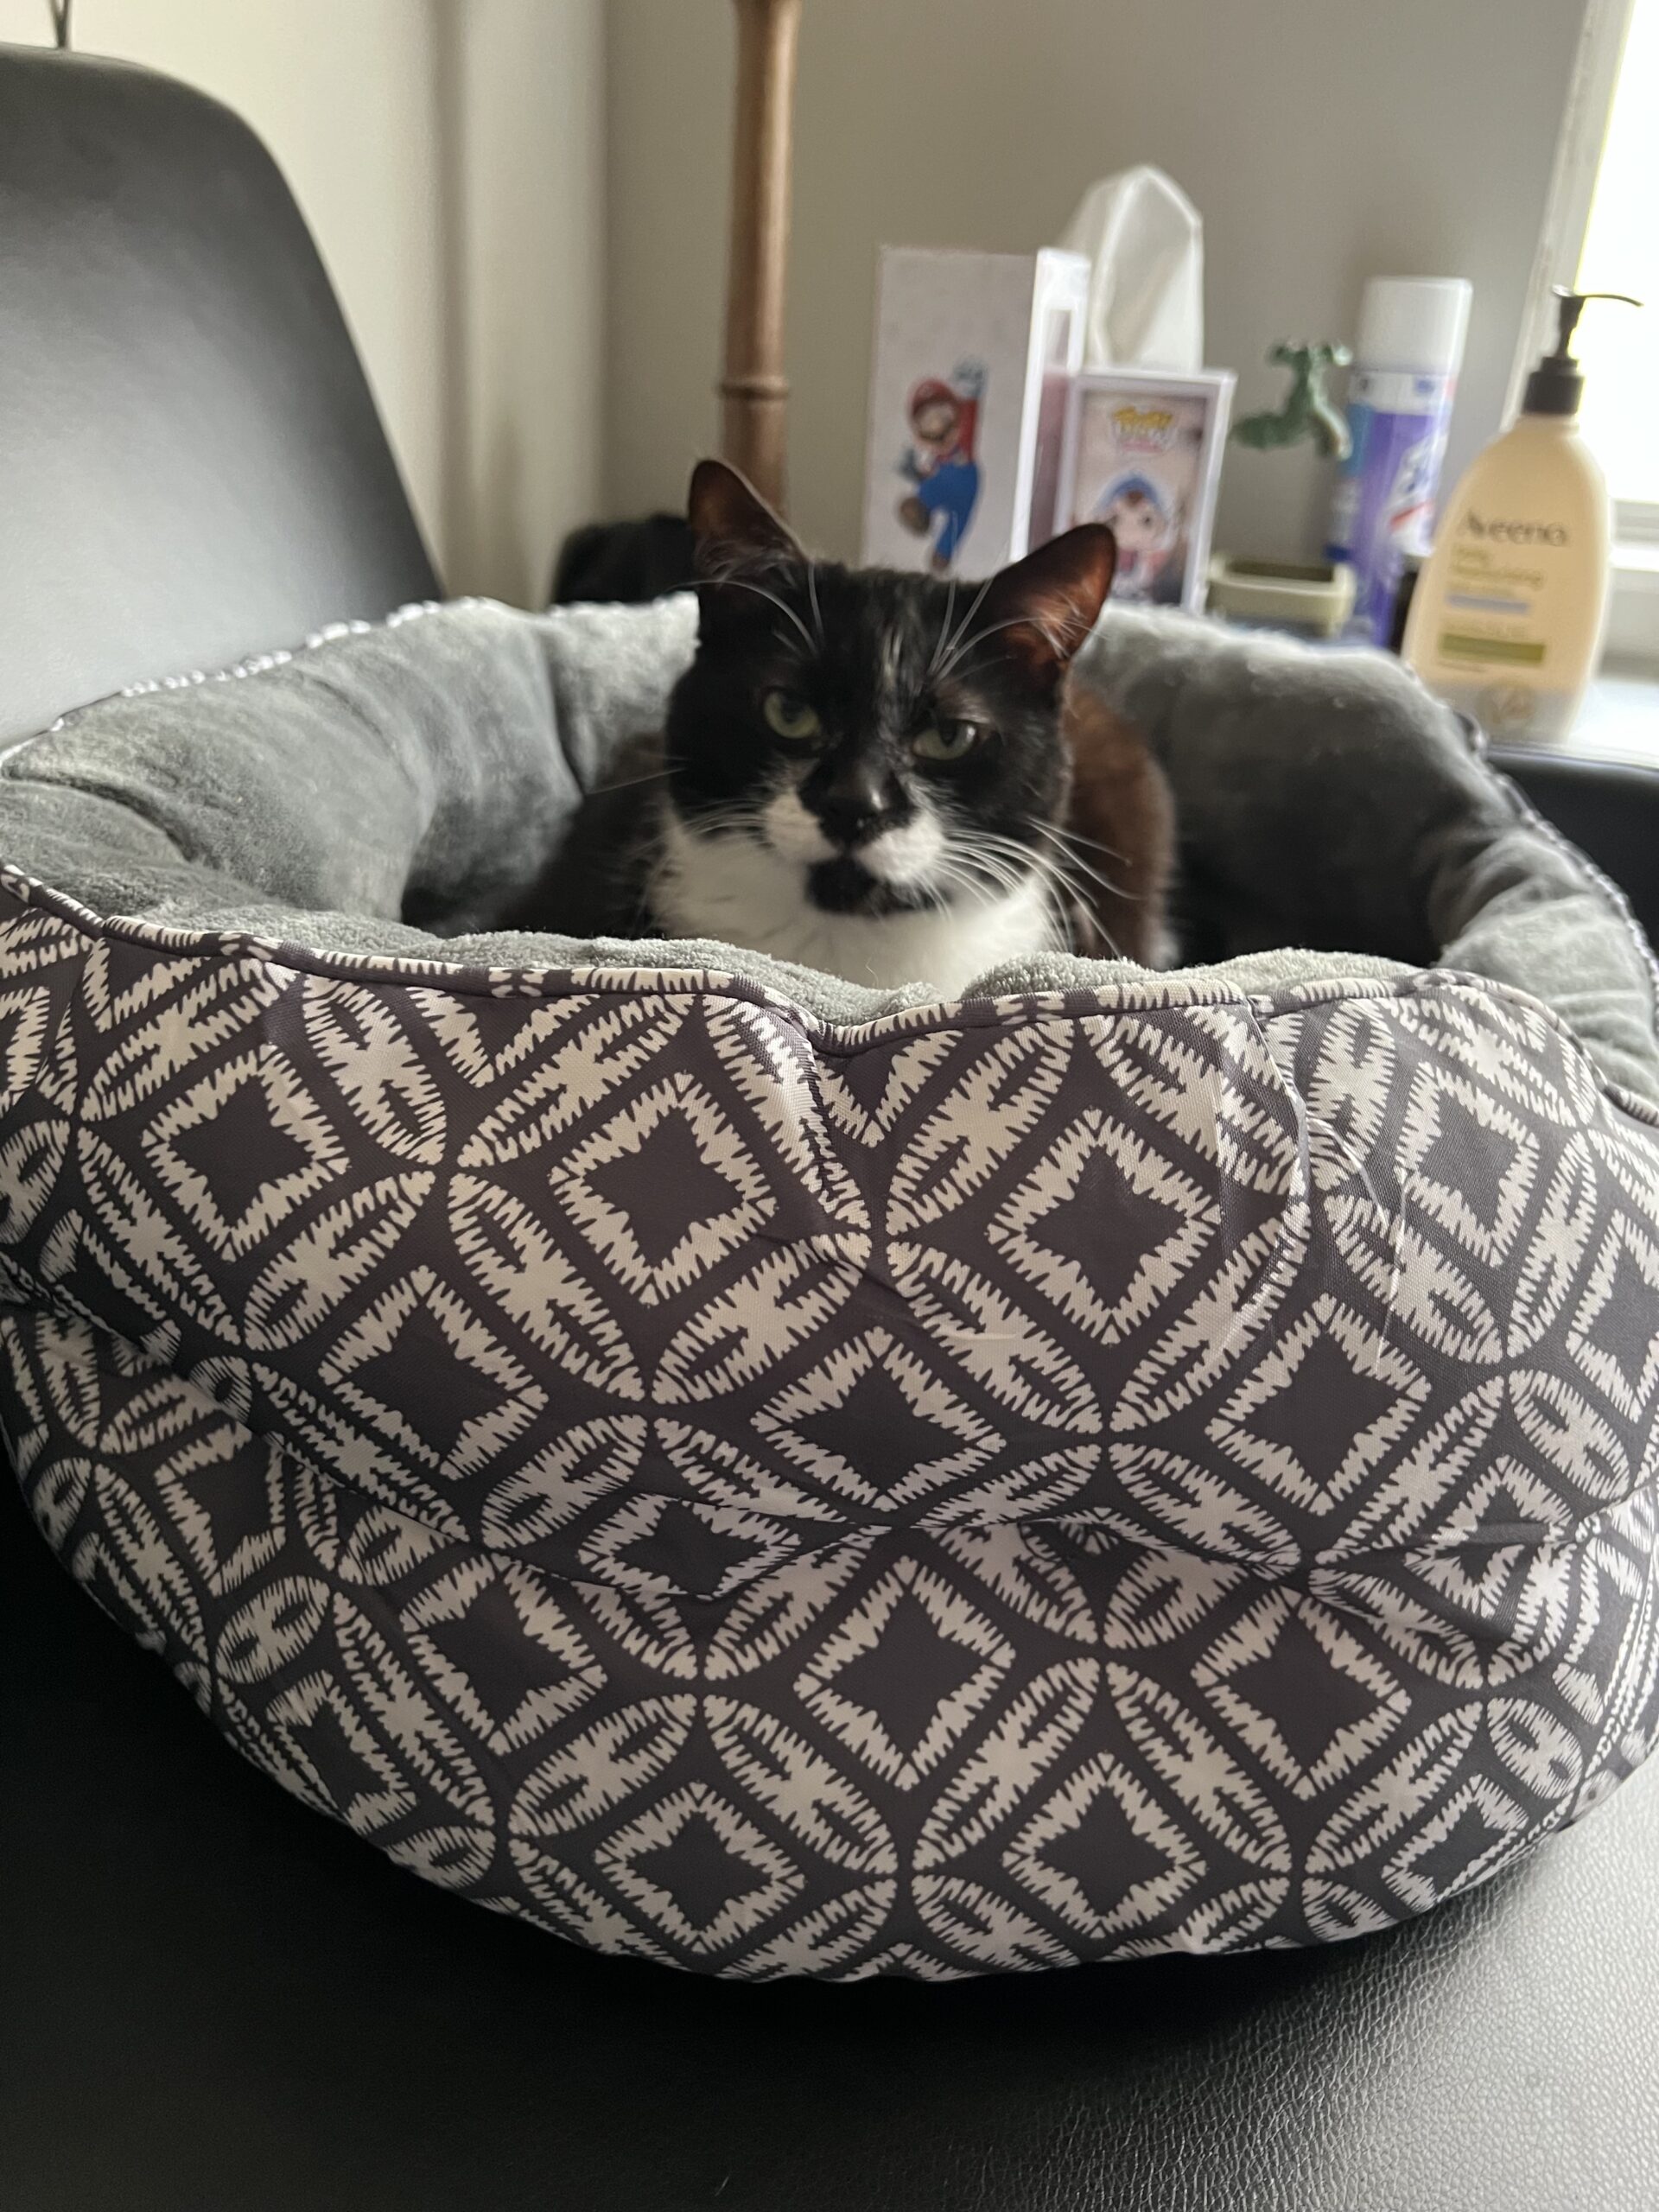 a black and white cat loafing in a large cat bed